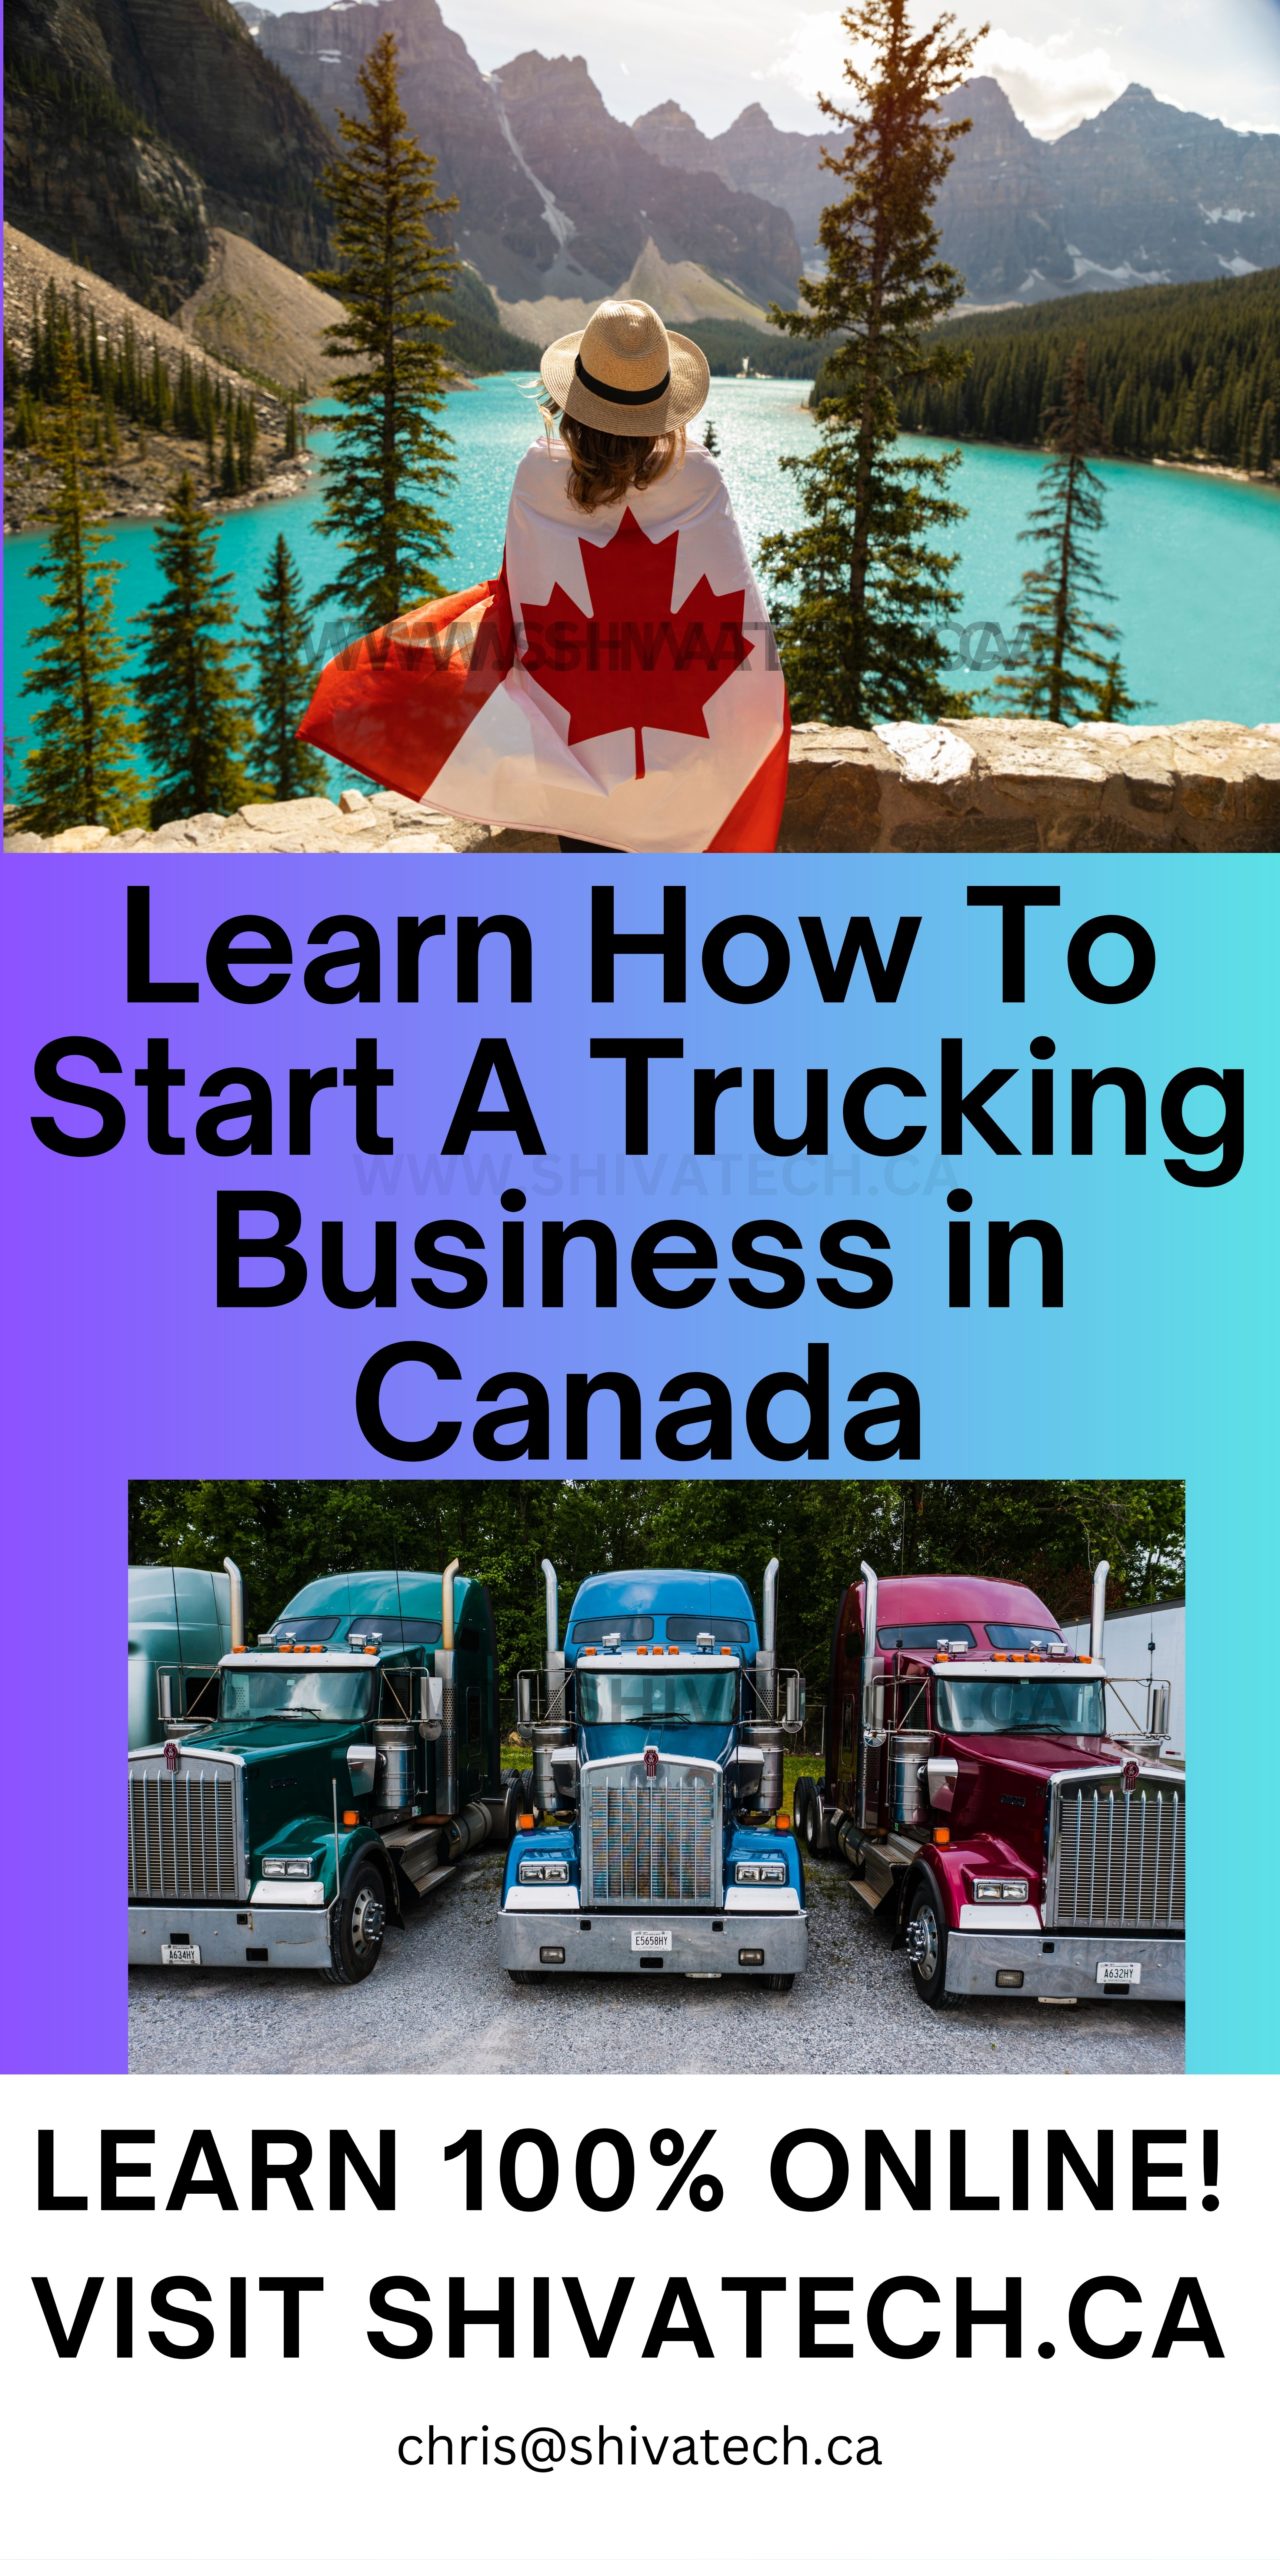 Learn Online From Bulgaria About Starting A Trucking Business in Canada